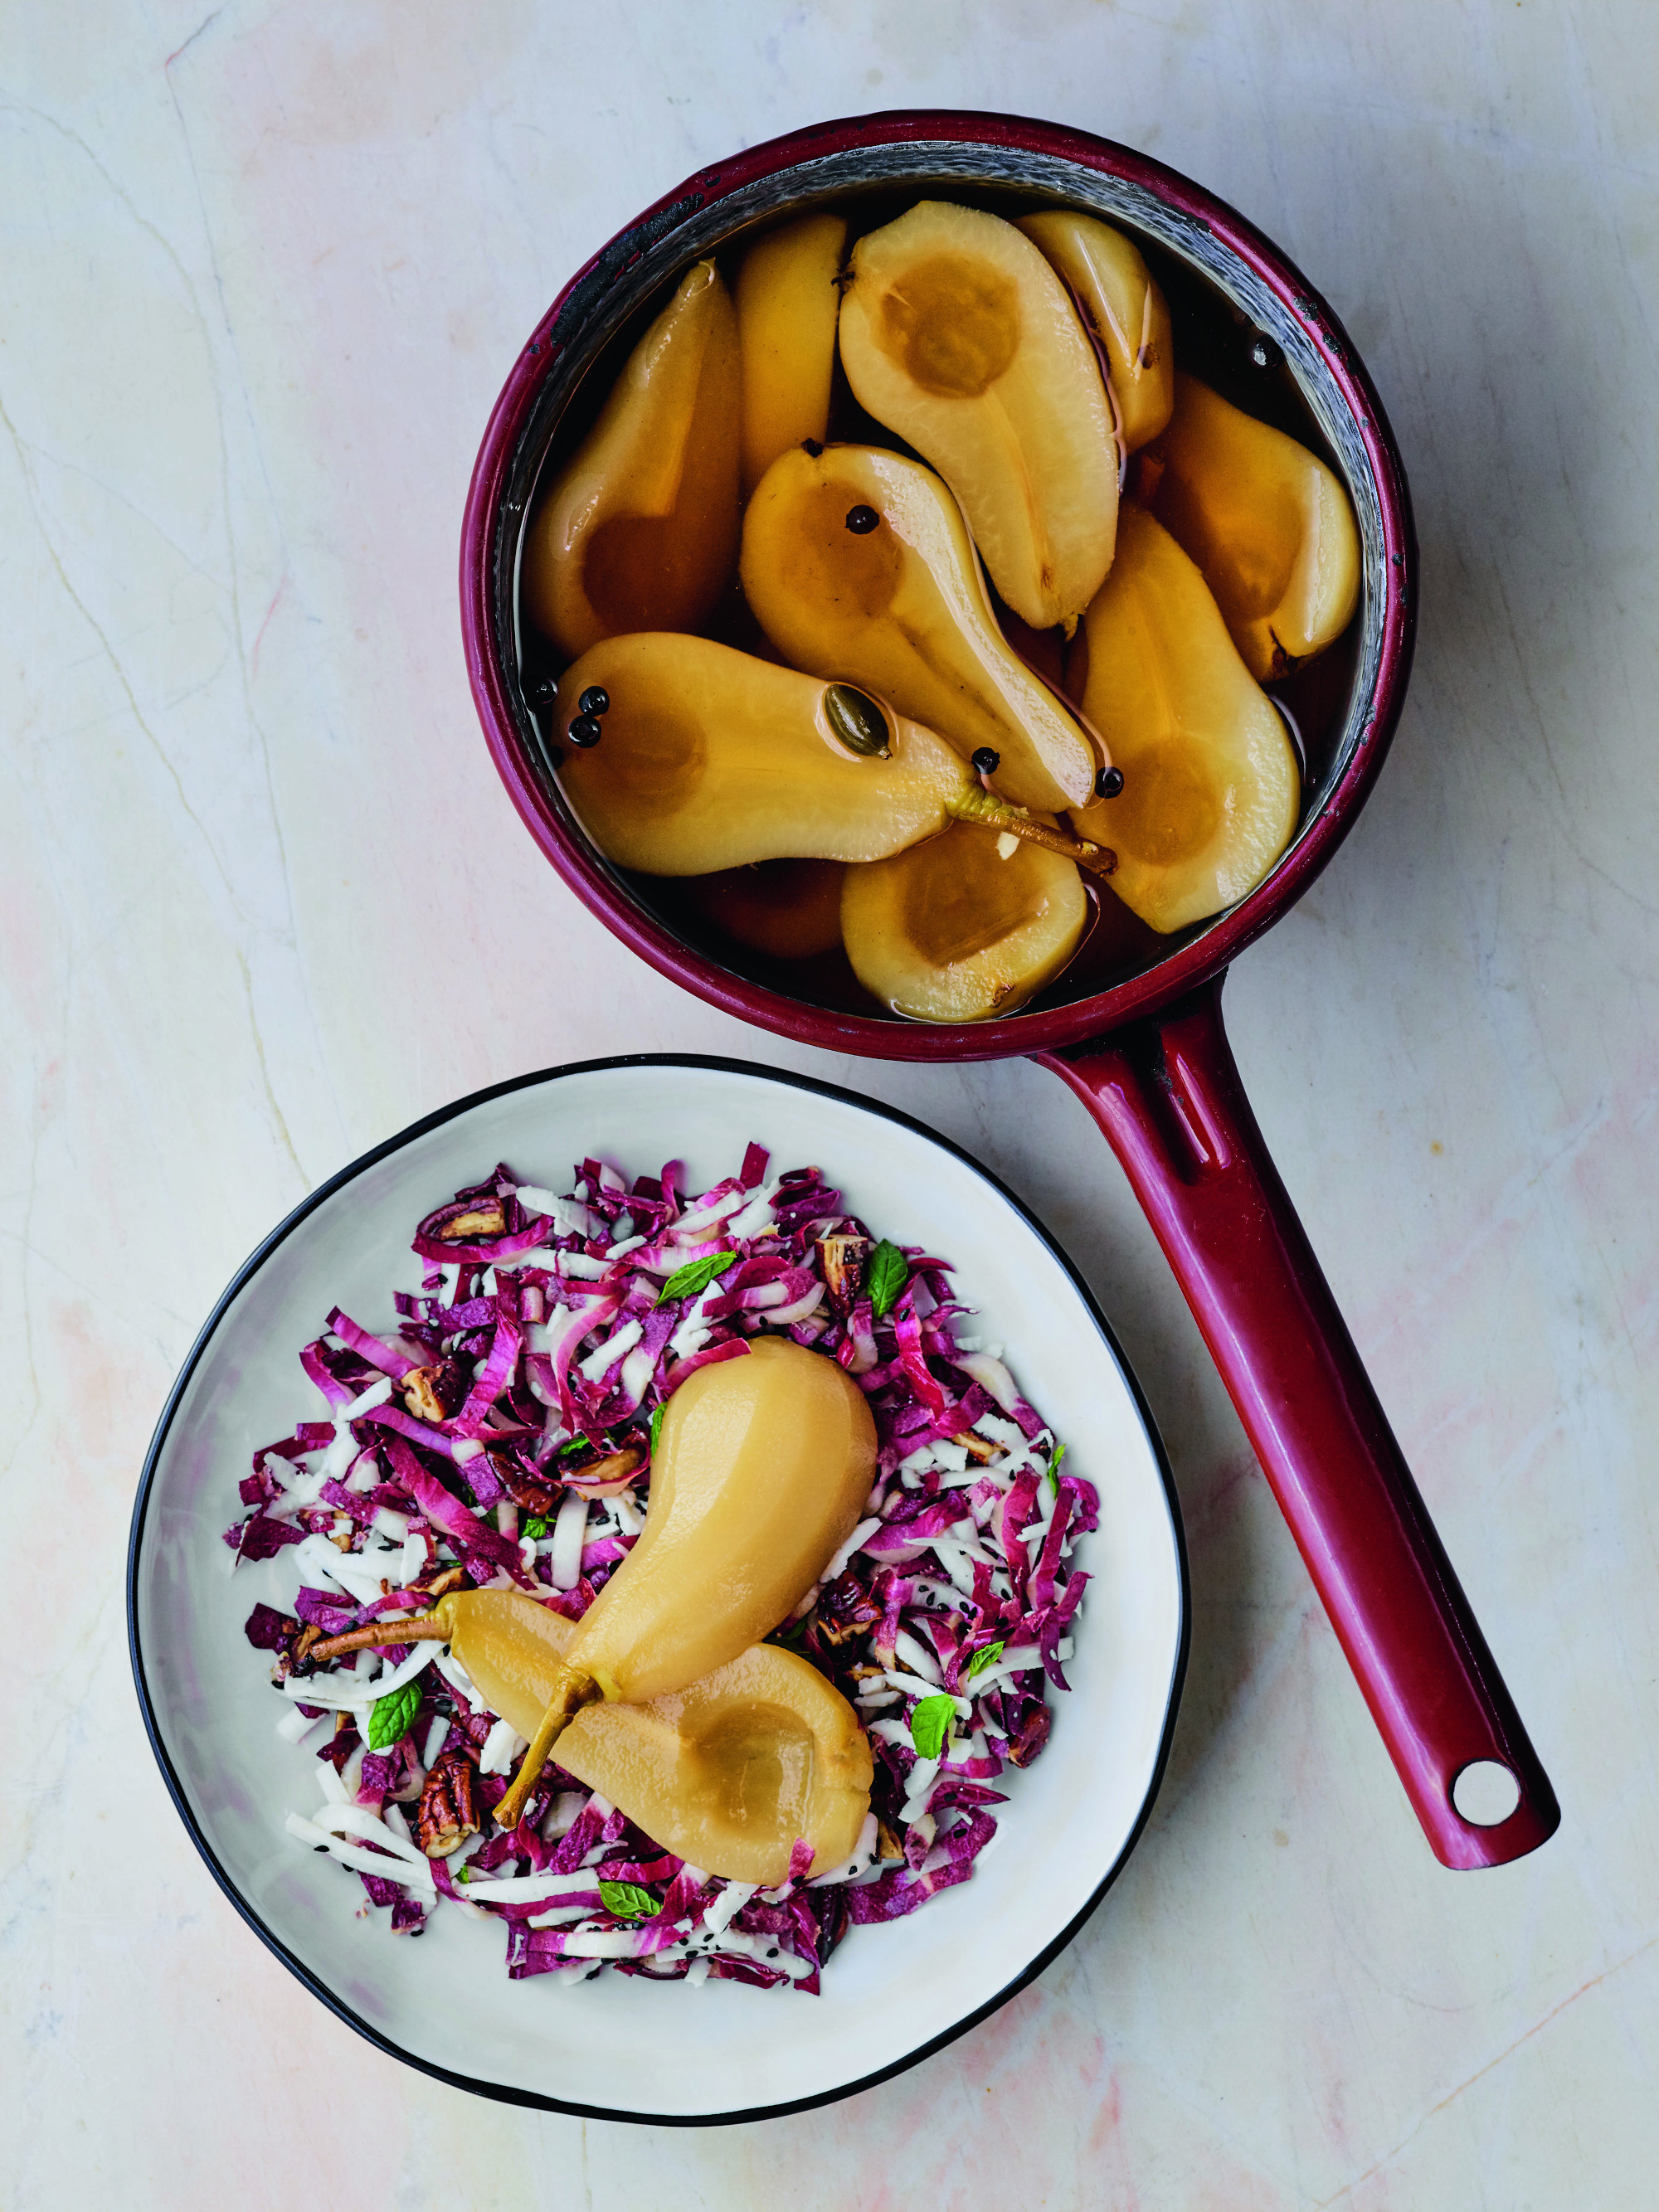 Baharat poached pear with radicchio white cheese Slaw and candied pecans. Photo by Dan Perez